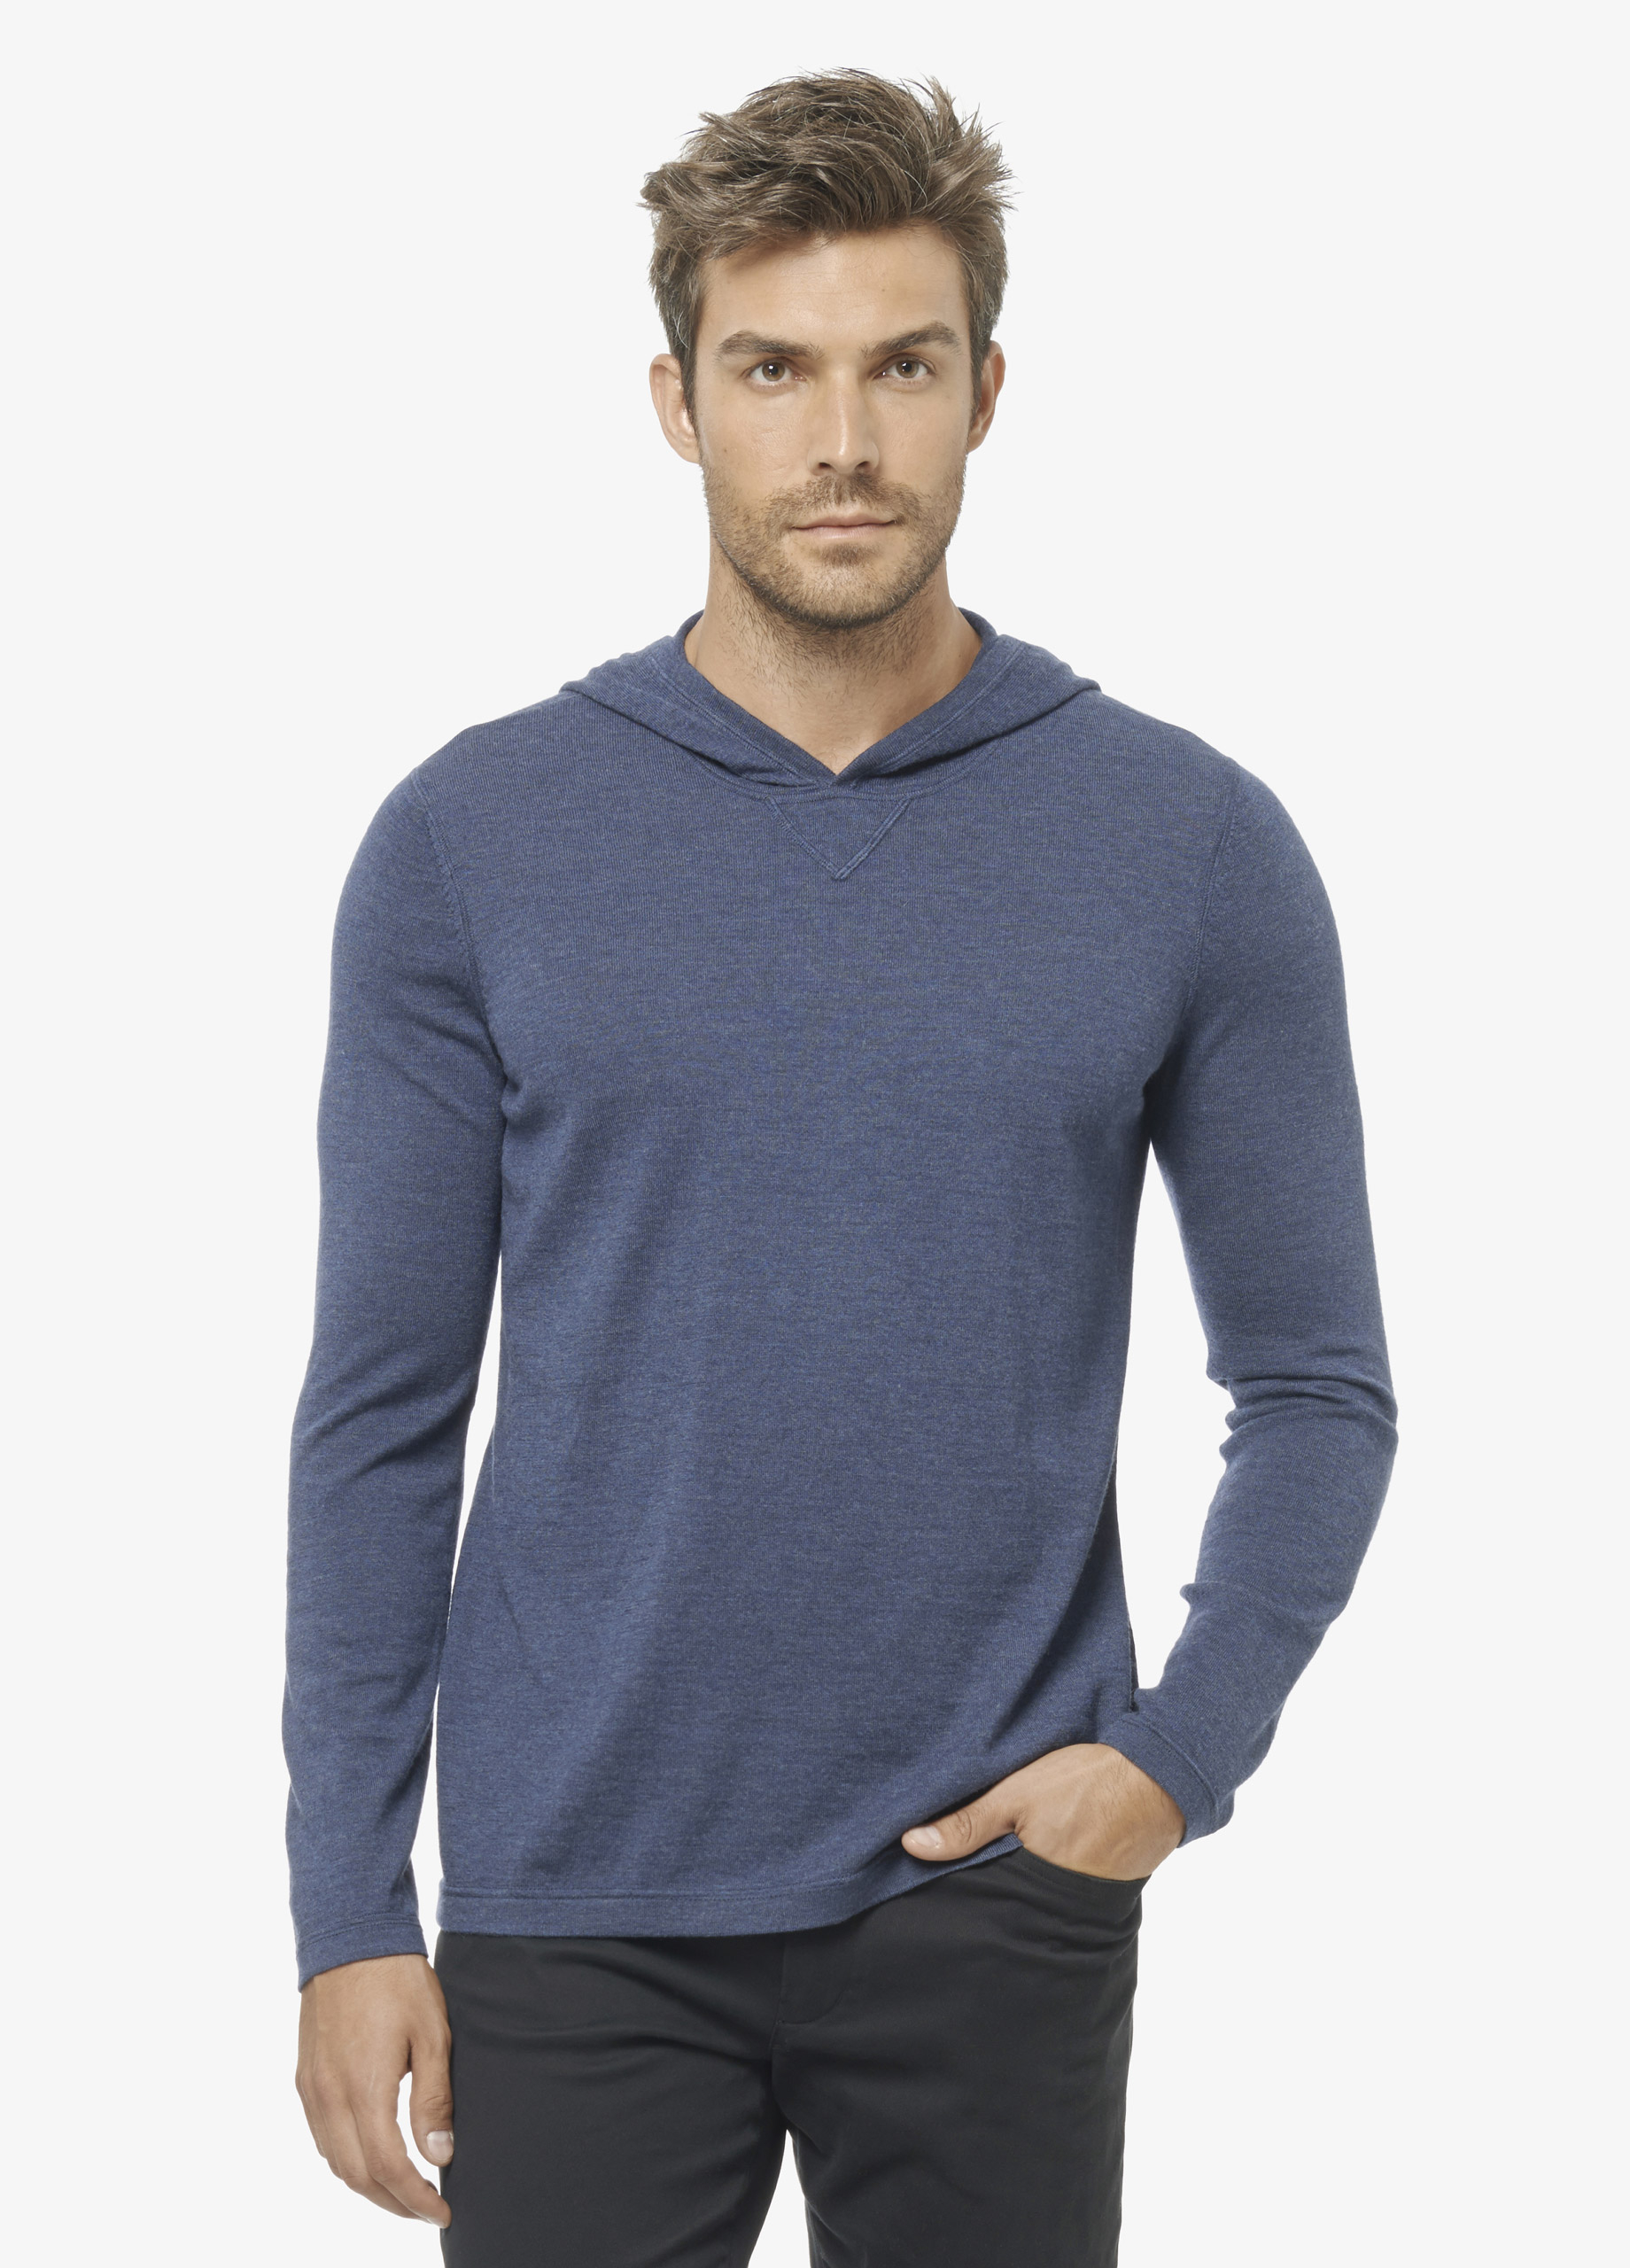 Vince Featherweight Wool Cashmere Hoodie in Blue for Men - Lyst